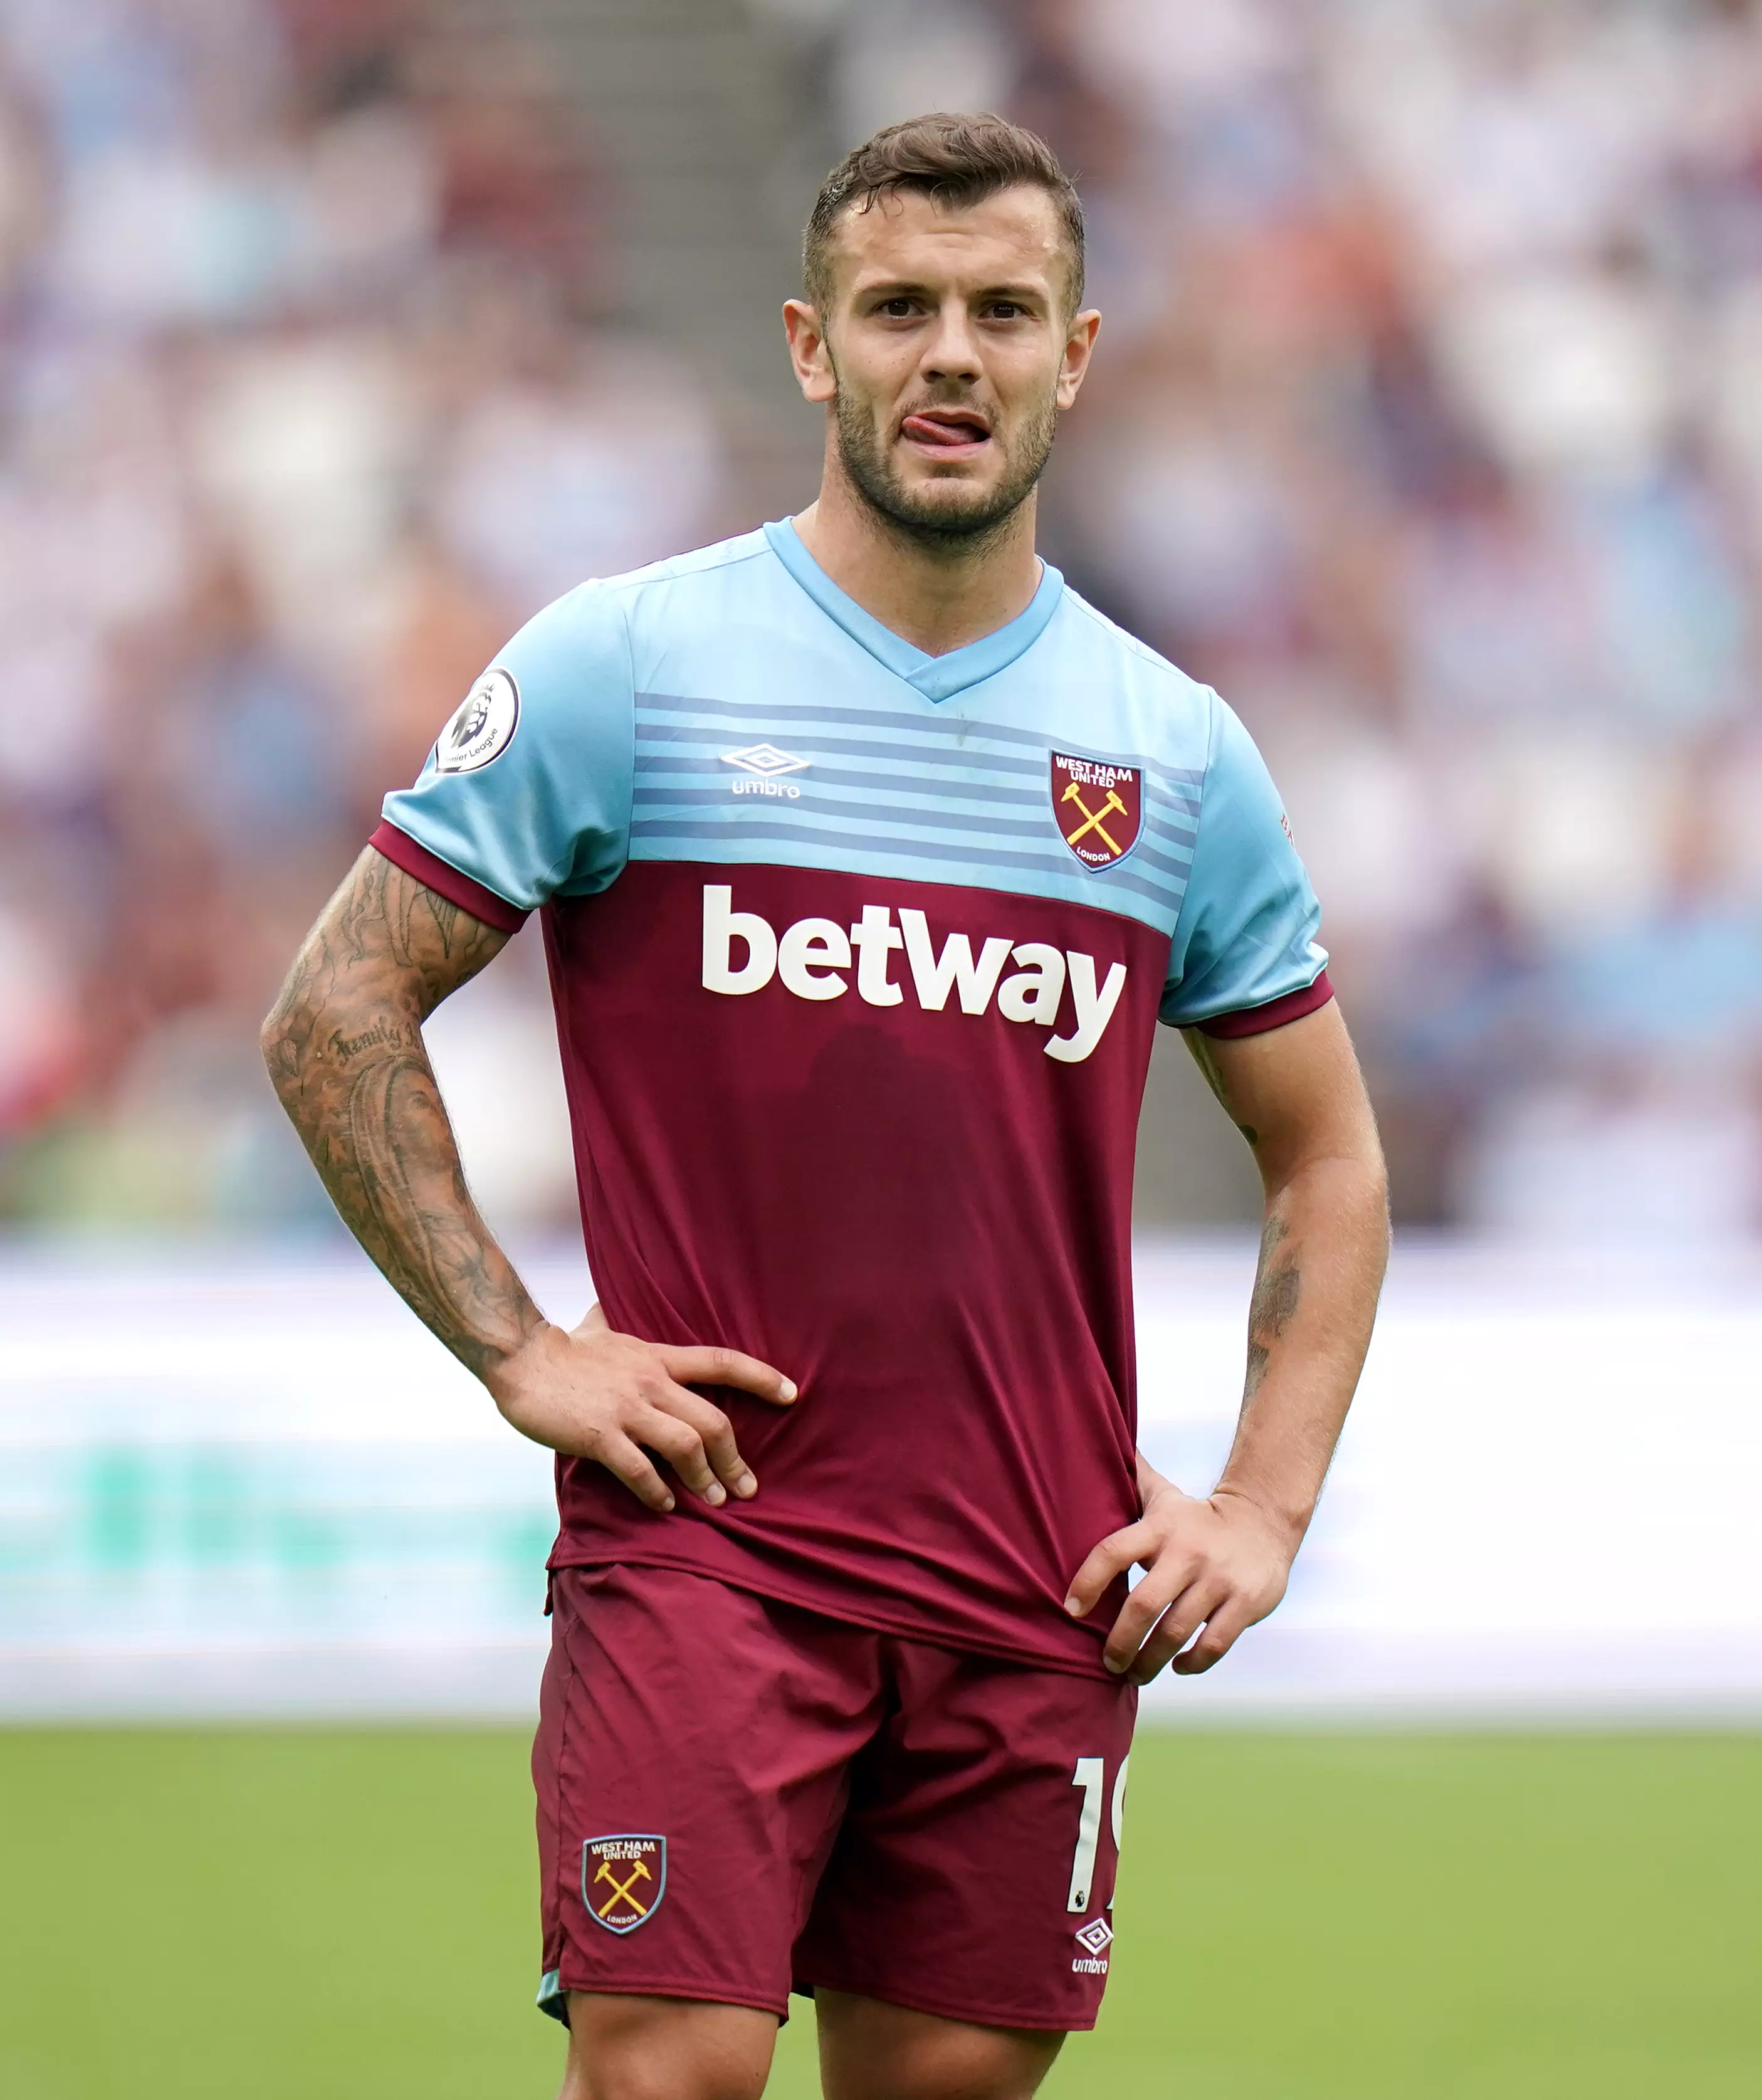 Wilshere also had a stint with West Ham.